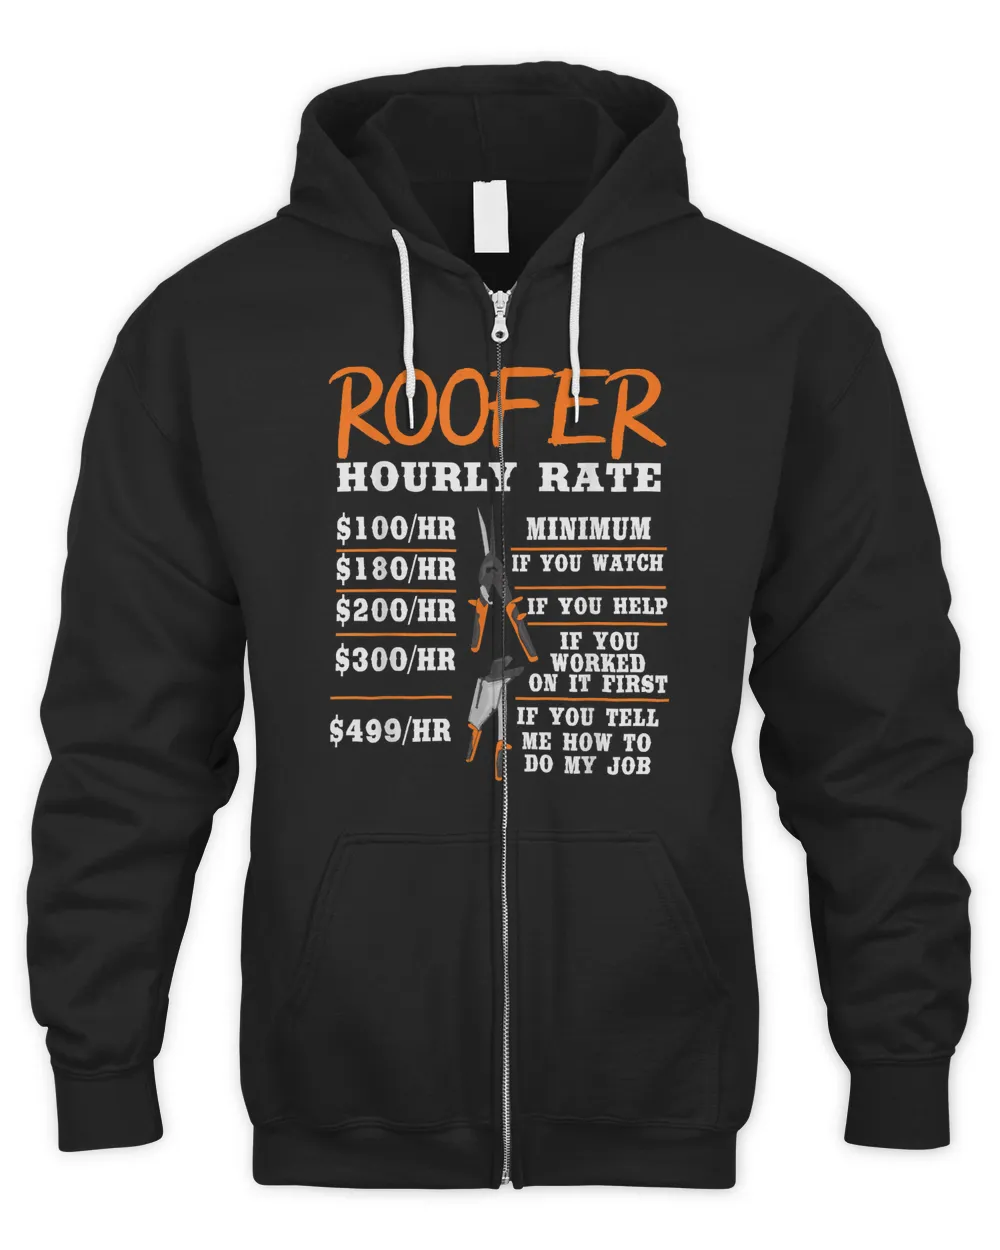 Roofer Shirt - Funny Construction Worker Roofer Hourly Rate T-Shirt